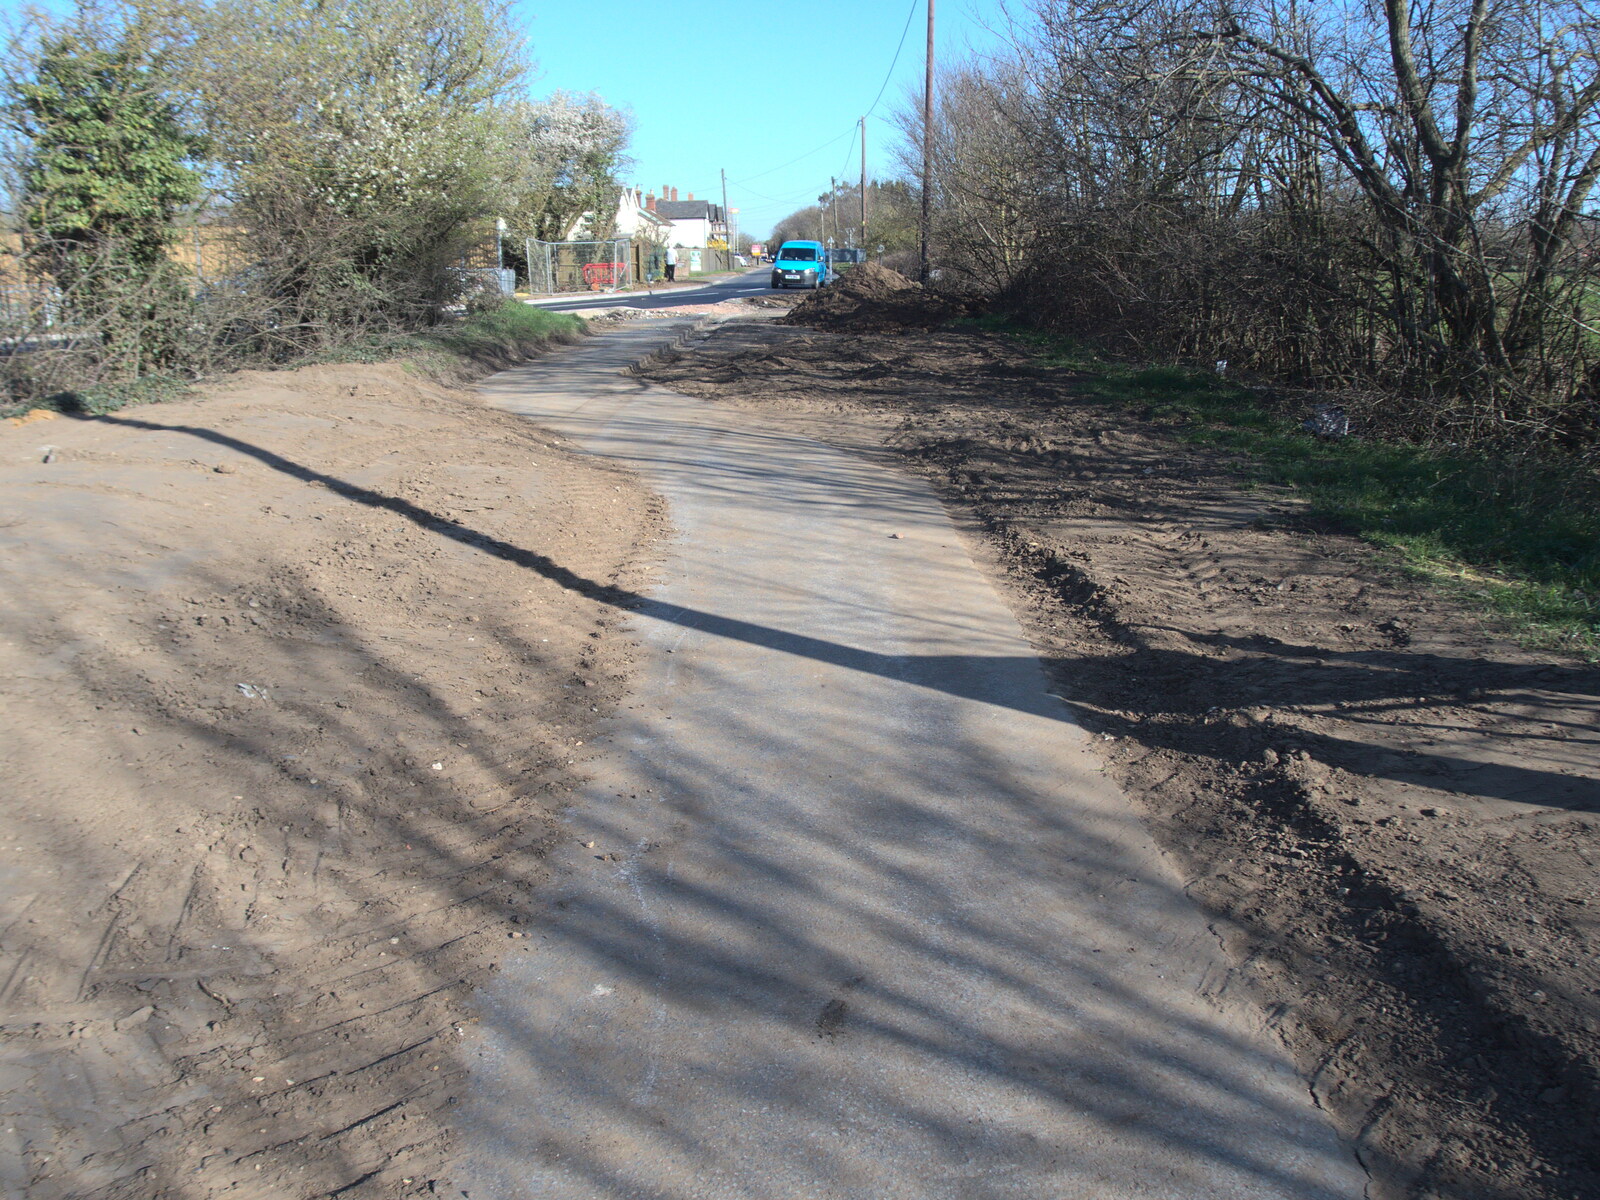 An old bit of B1077 is now a cycle path from Roadworks and Harry's Trampoline, Brome, Suffolk - 6th April 2021